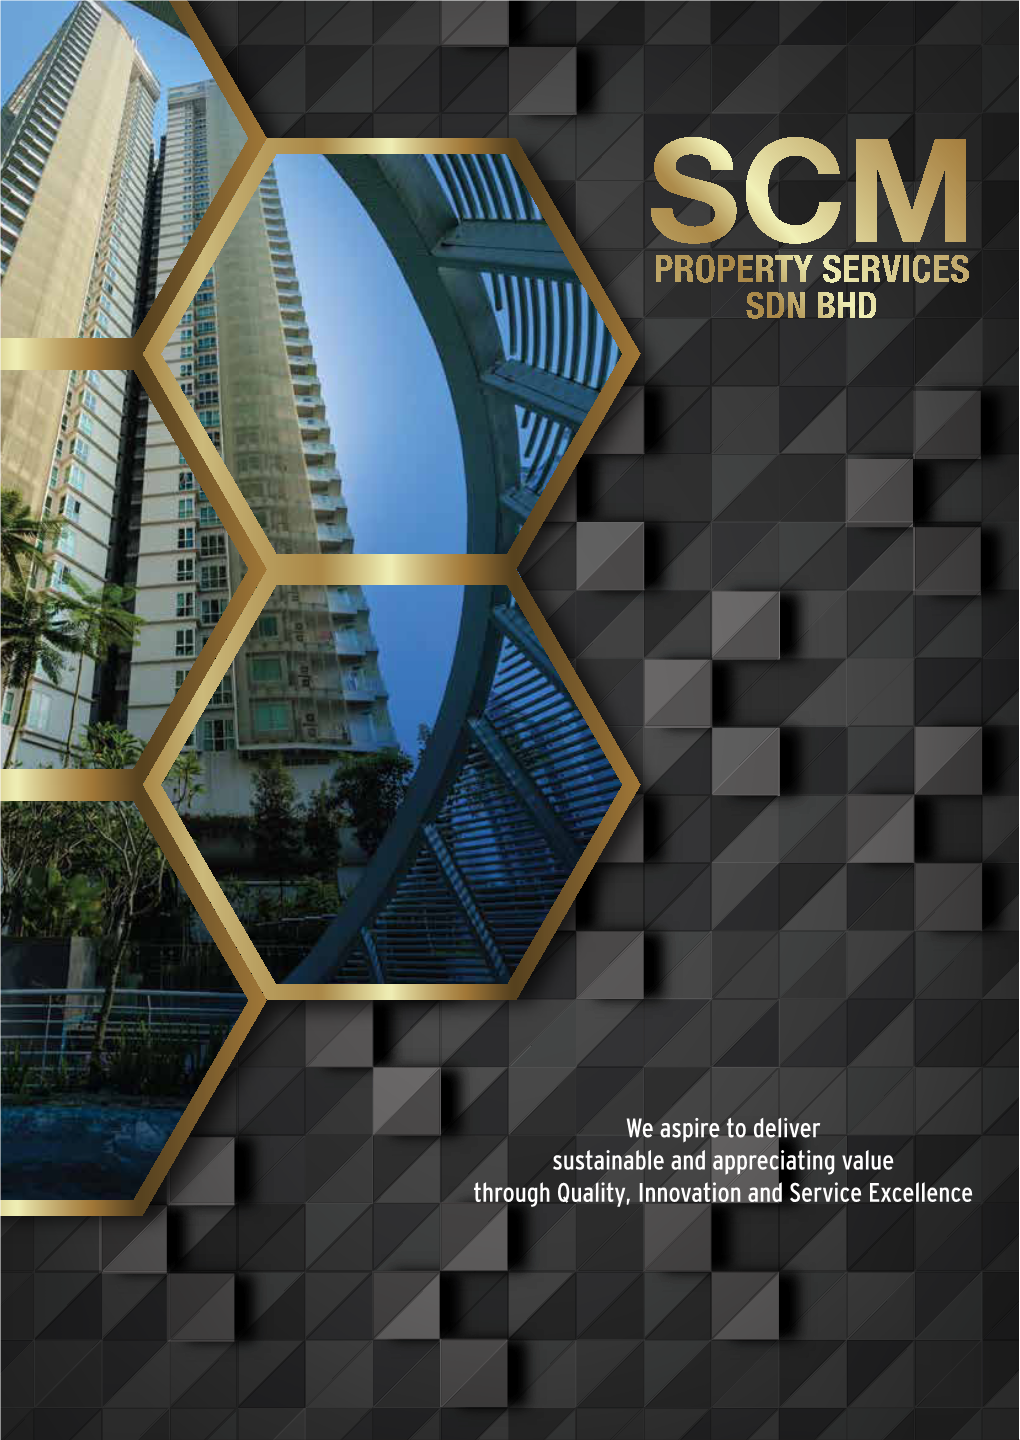 Scm Property Services Sdn Bhd | Contents